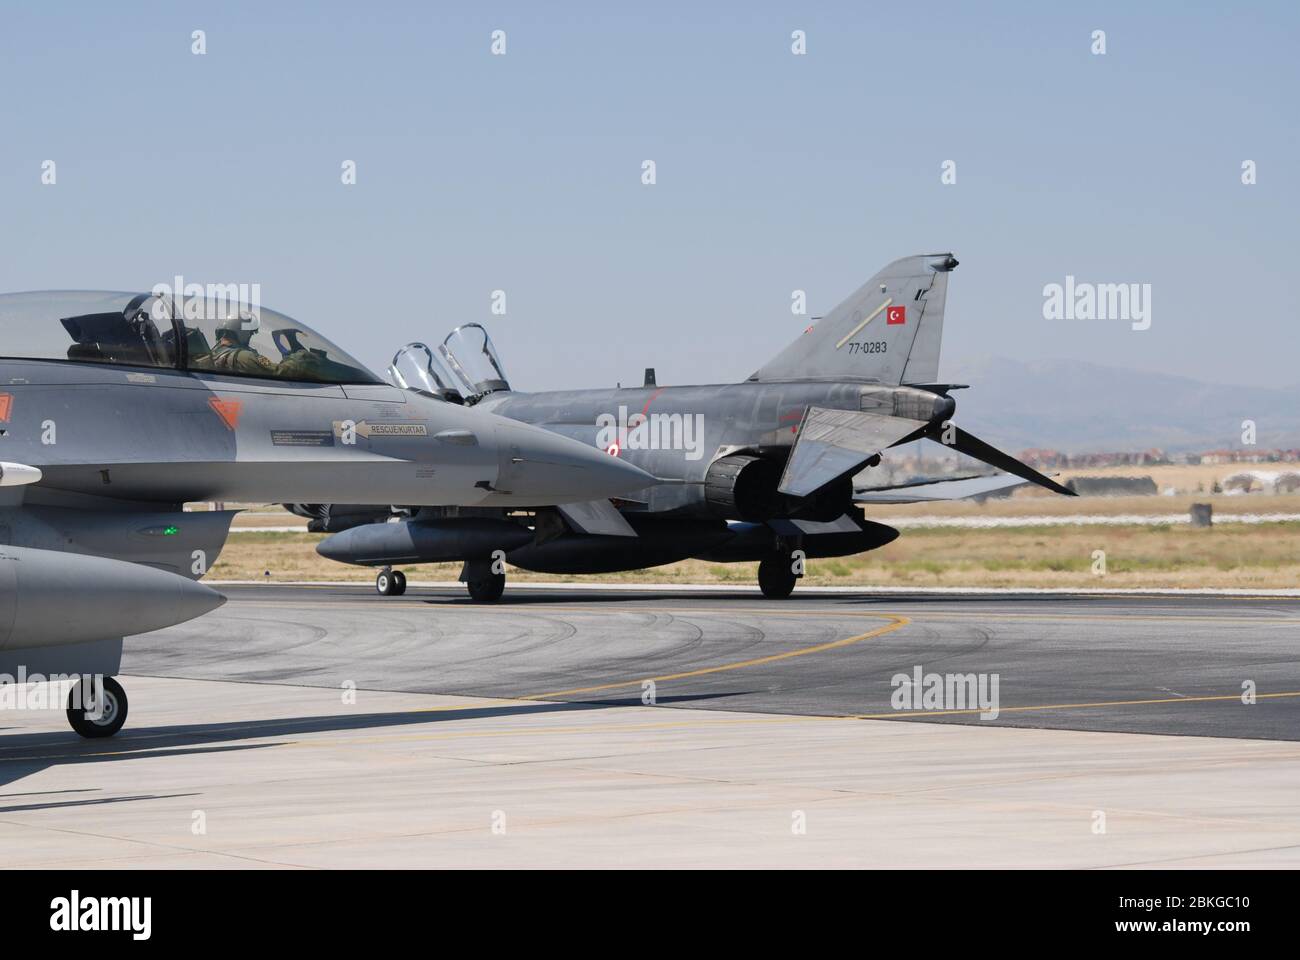 Turkish Air Force F-4 Phantom jet fighter prepares to takeoff from an air base during the Anatolian Eagle military exercise in Konya Stock Photo